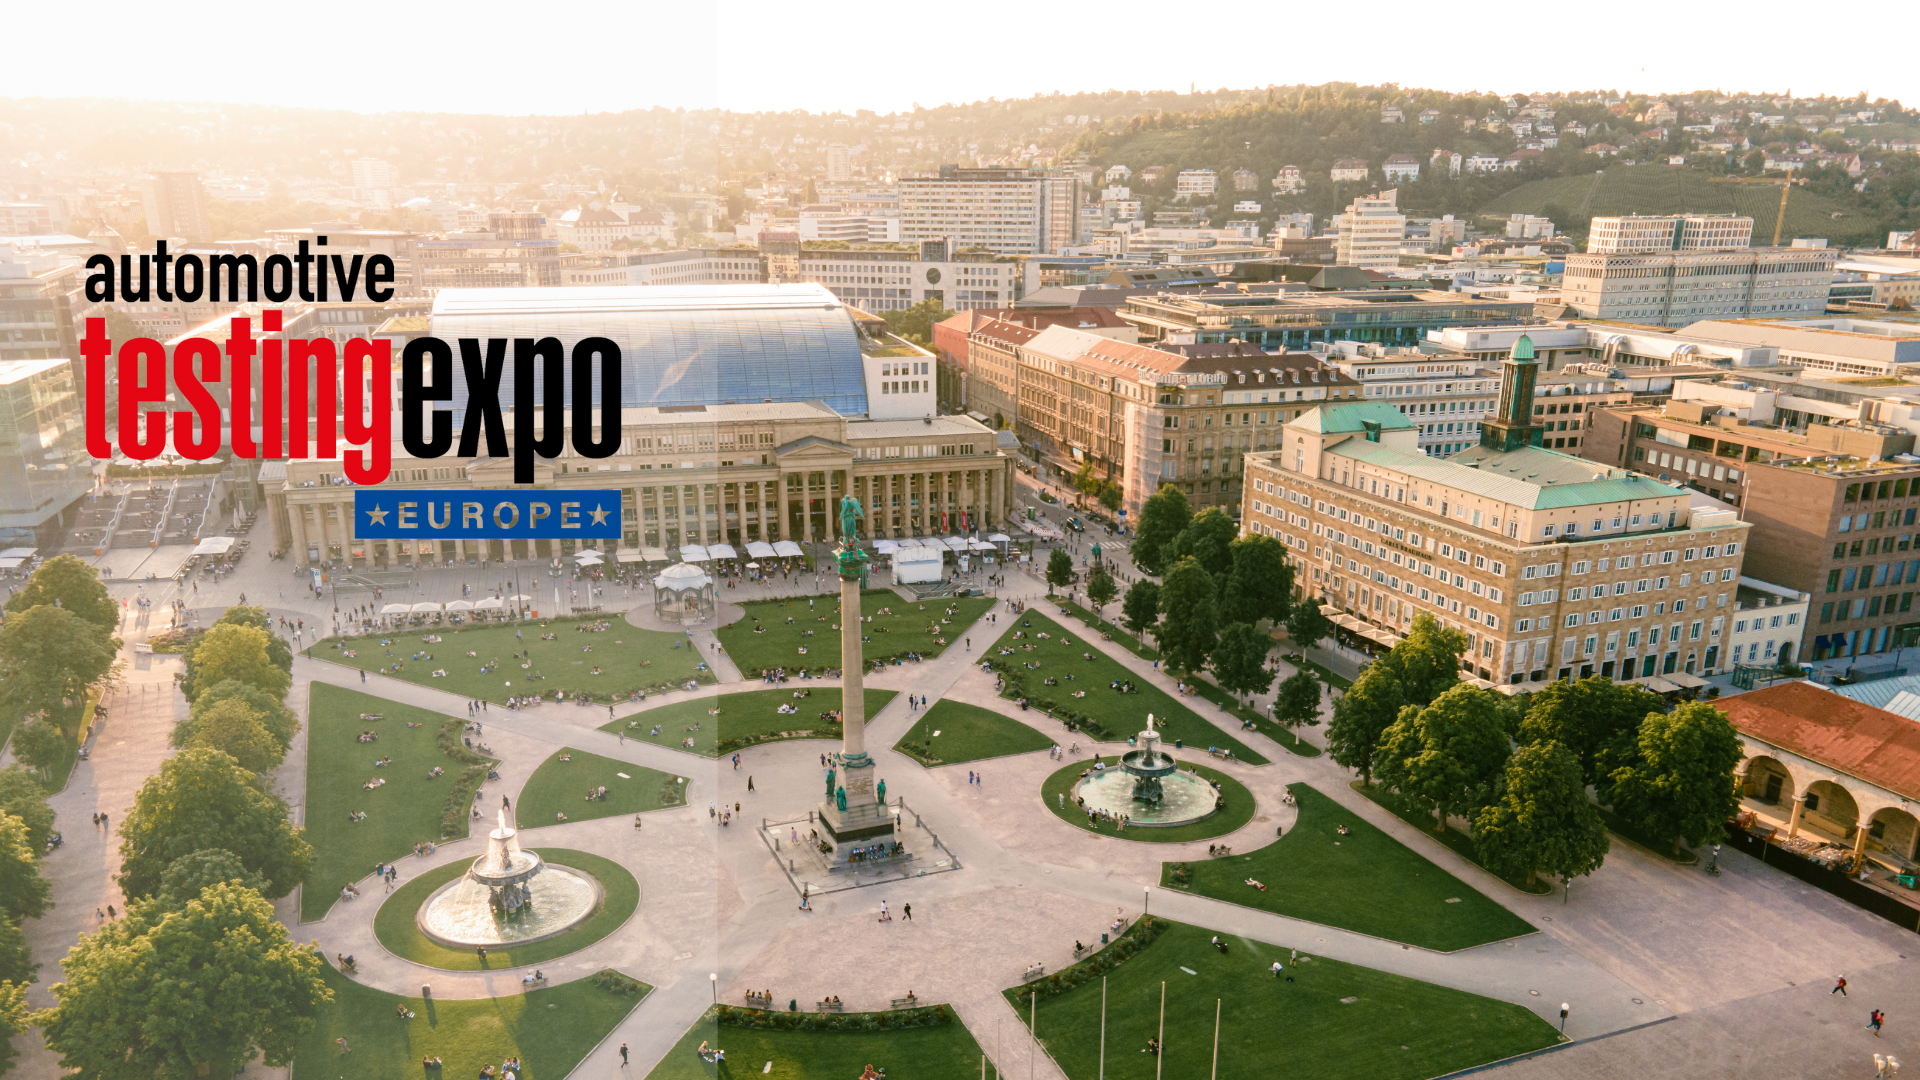 An Aerial view of Stuttgart city with the Automotive Testing EXpo Europe logo on the upper right hand corner.